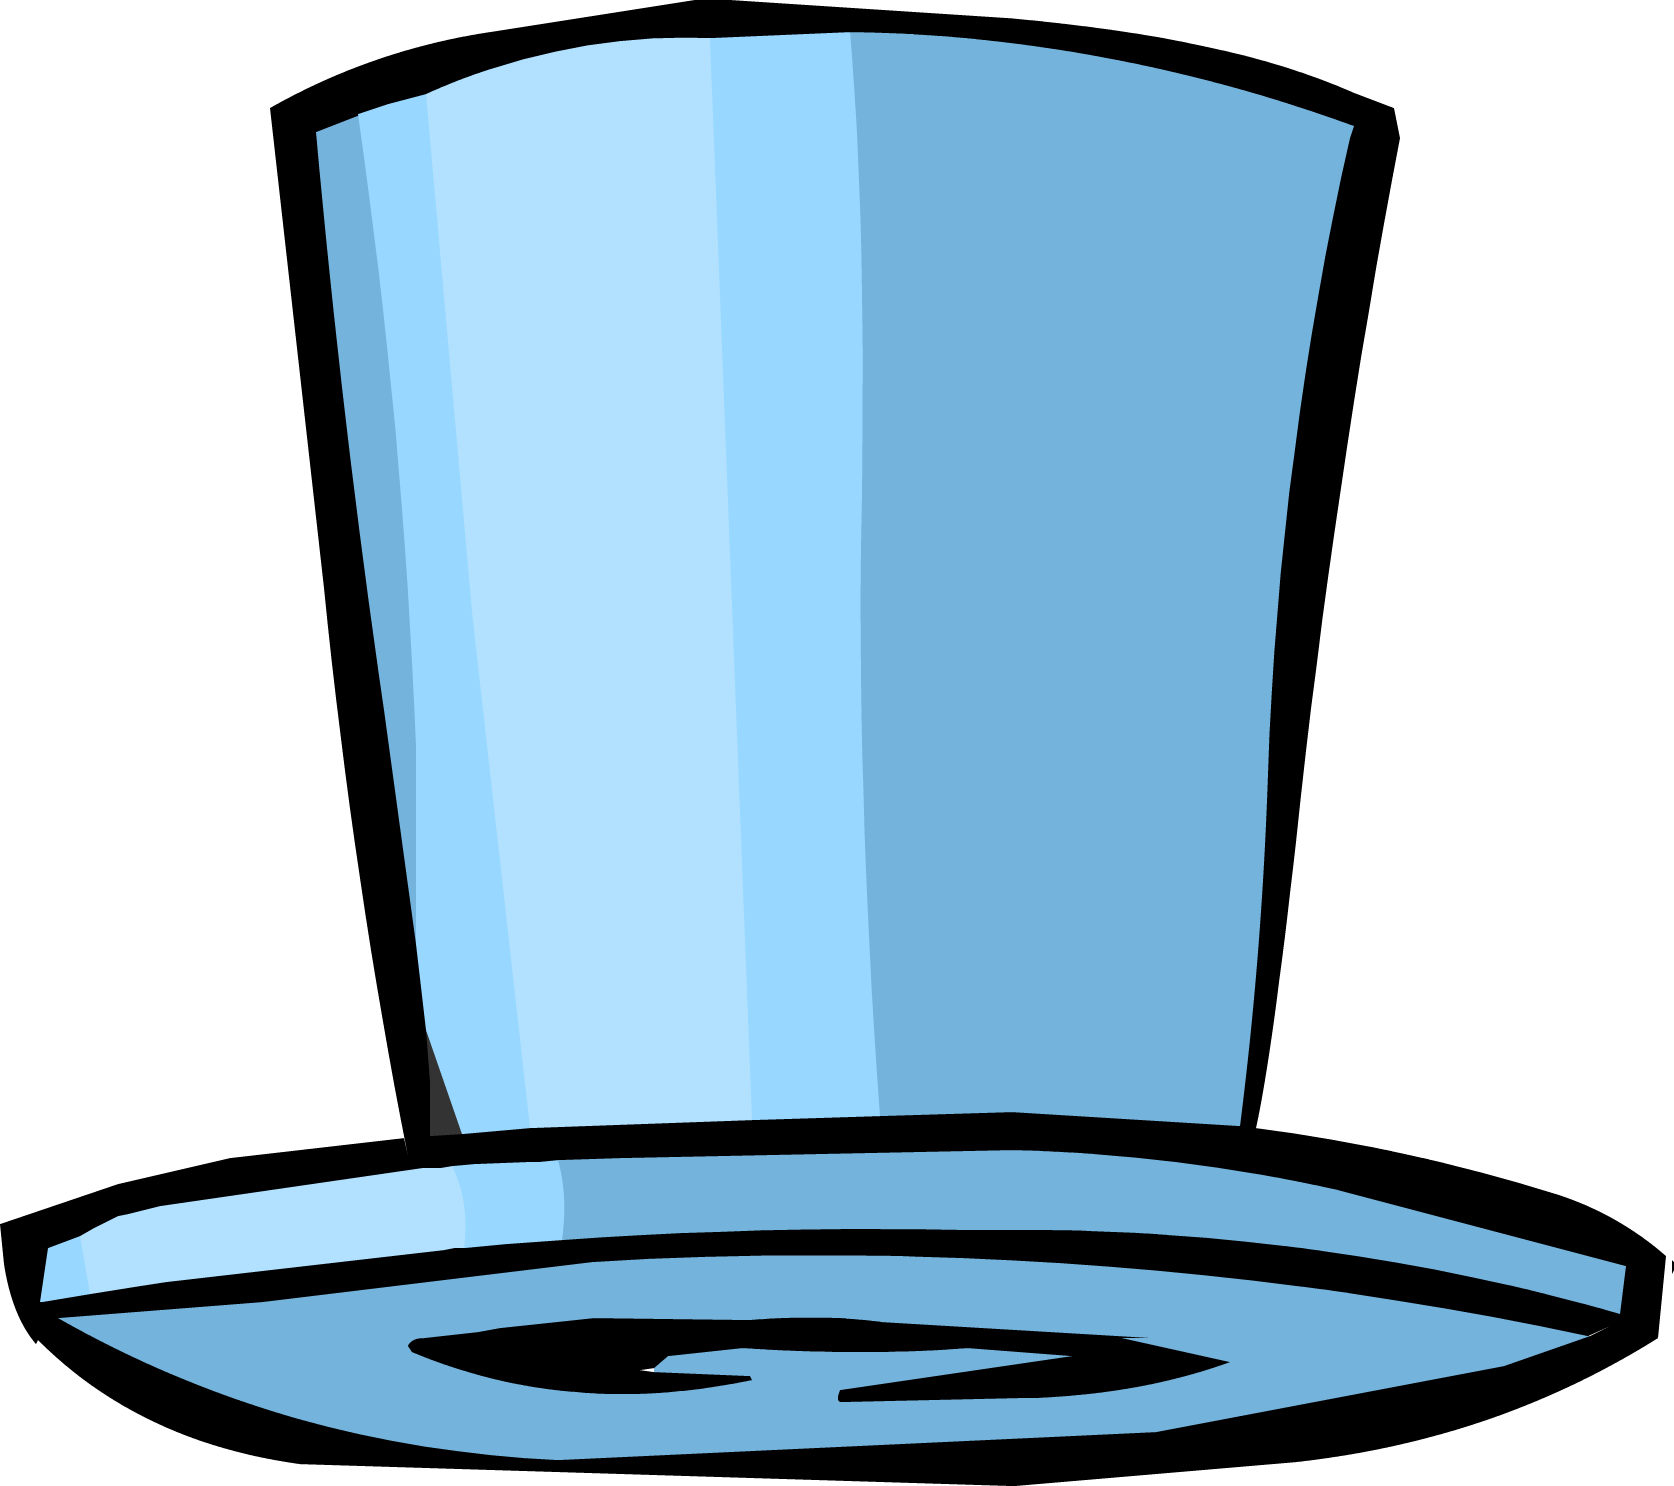 Related Blue Top Hat Clipart - Club Penguin Top Hat (1674x1486)